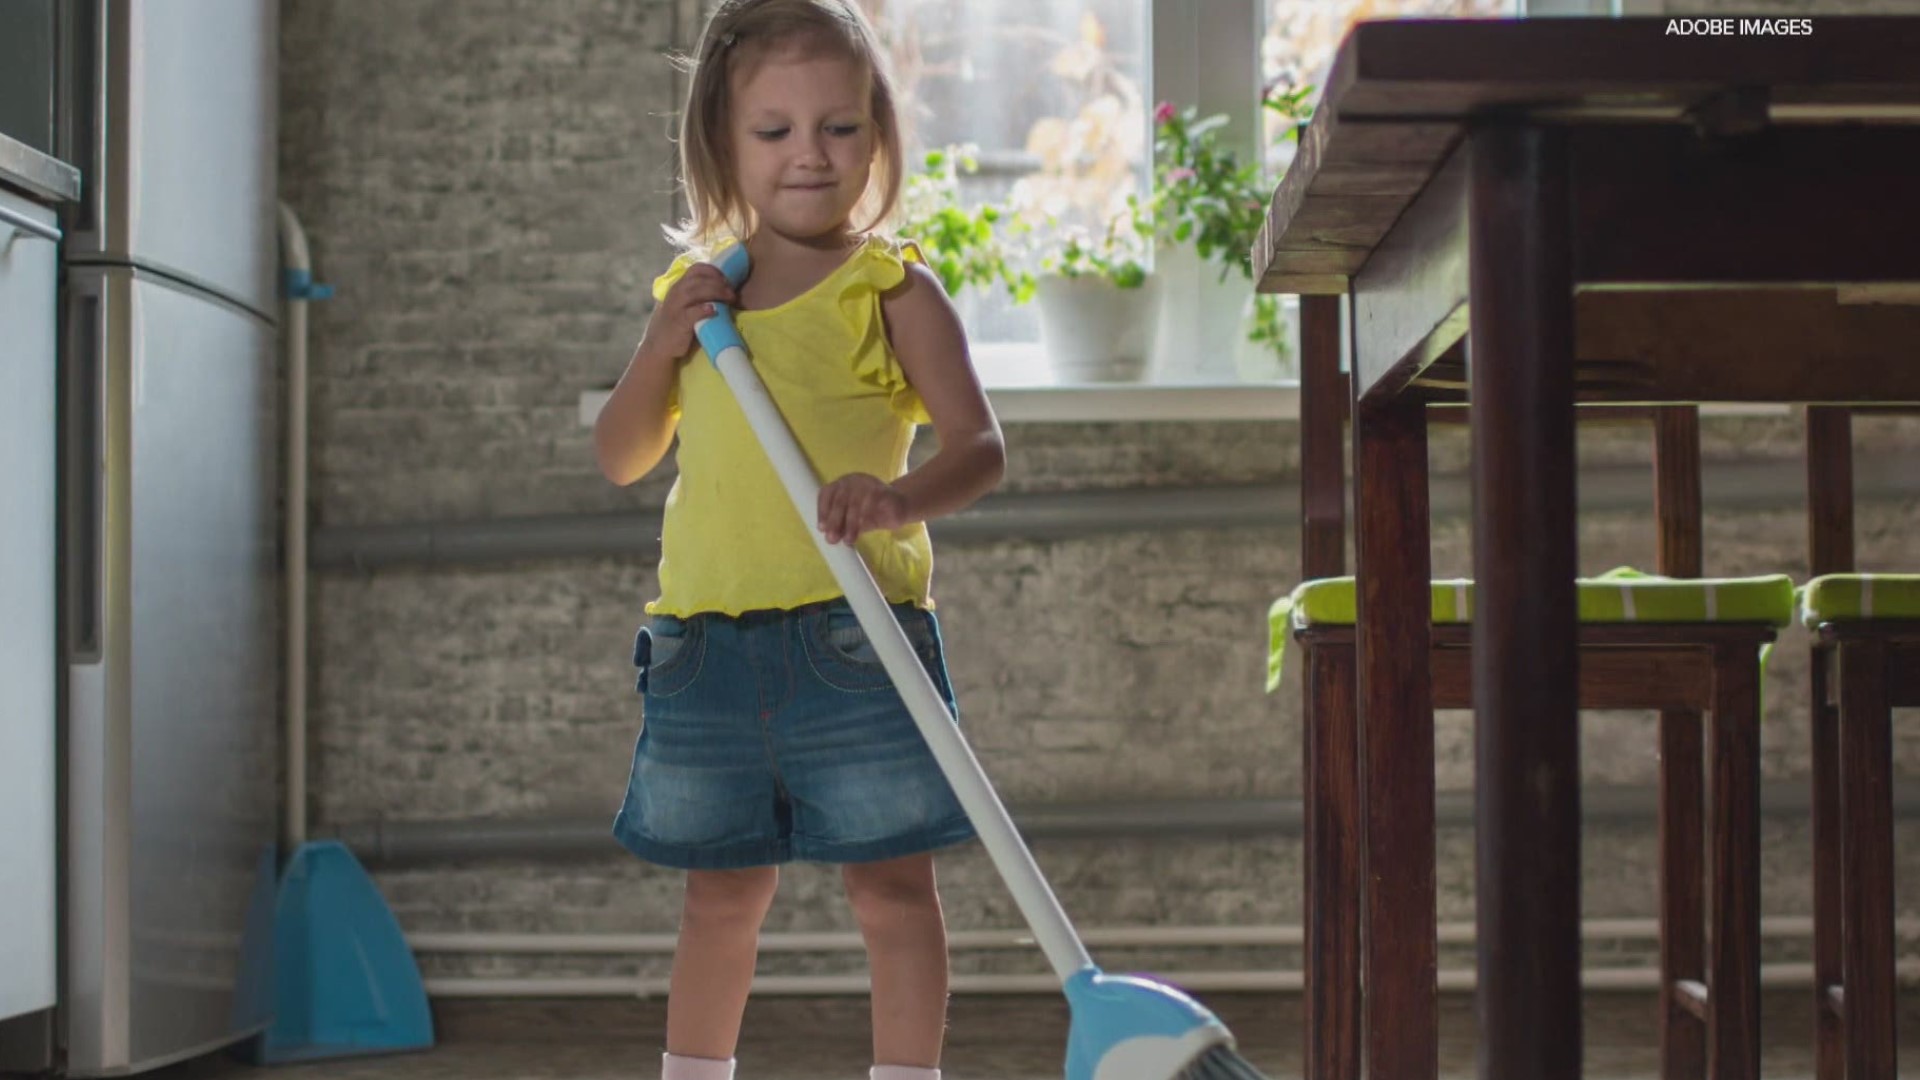 When should parents start giving chores and allowances to their kids? 13News Education Expert Jennifer Brinker shares some advice.